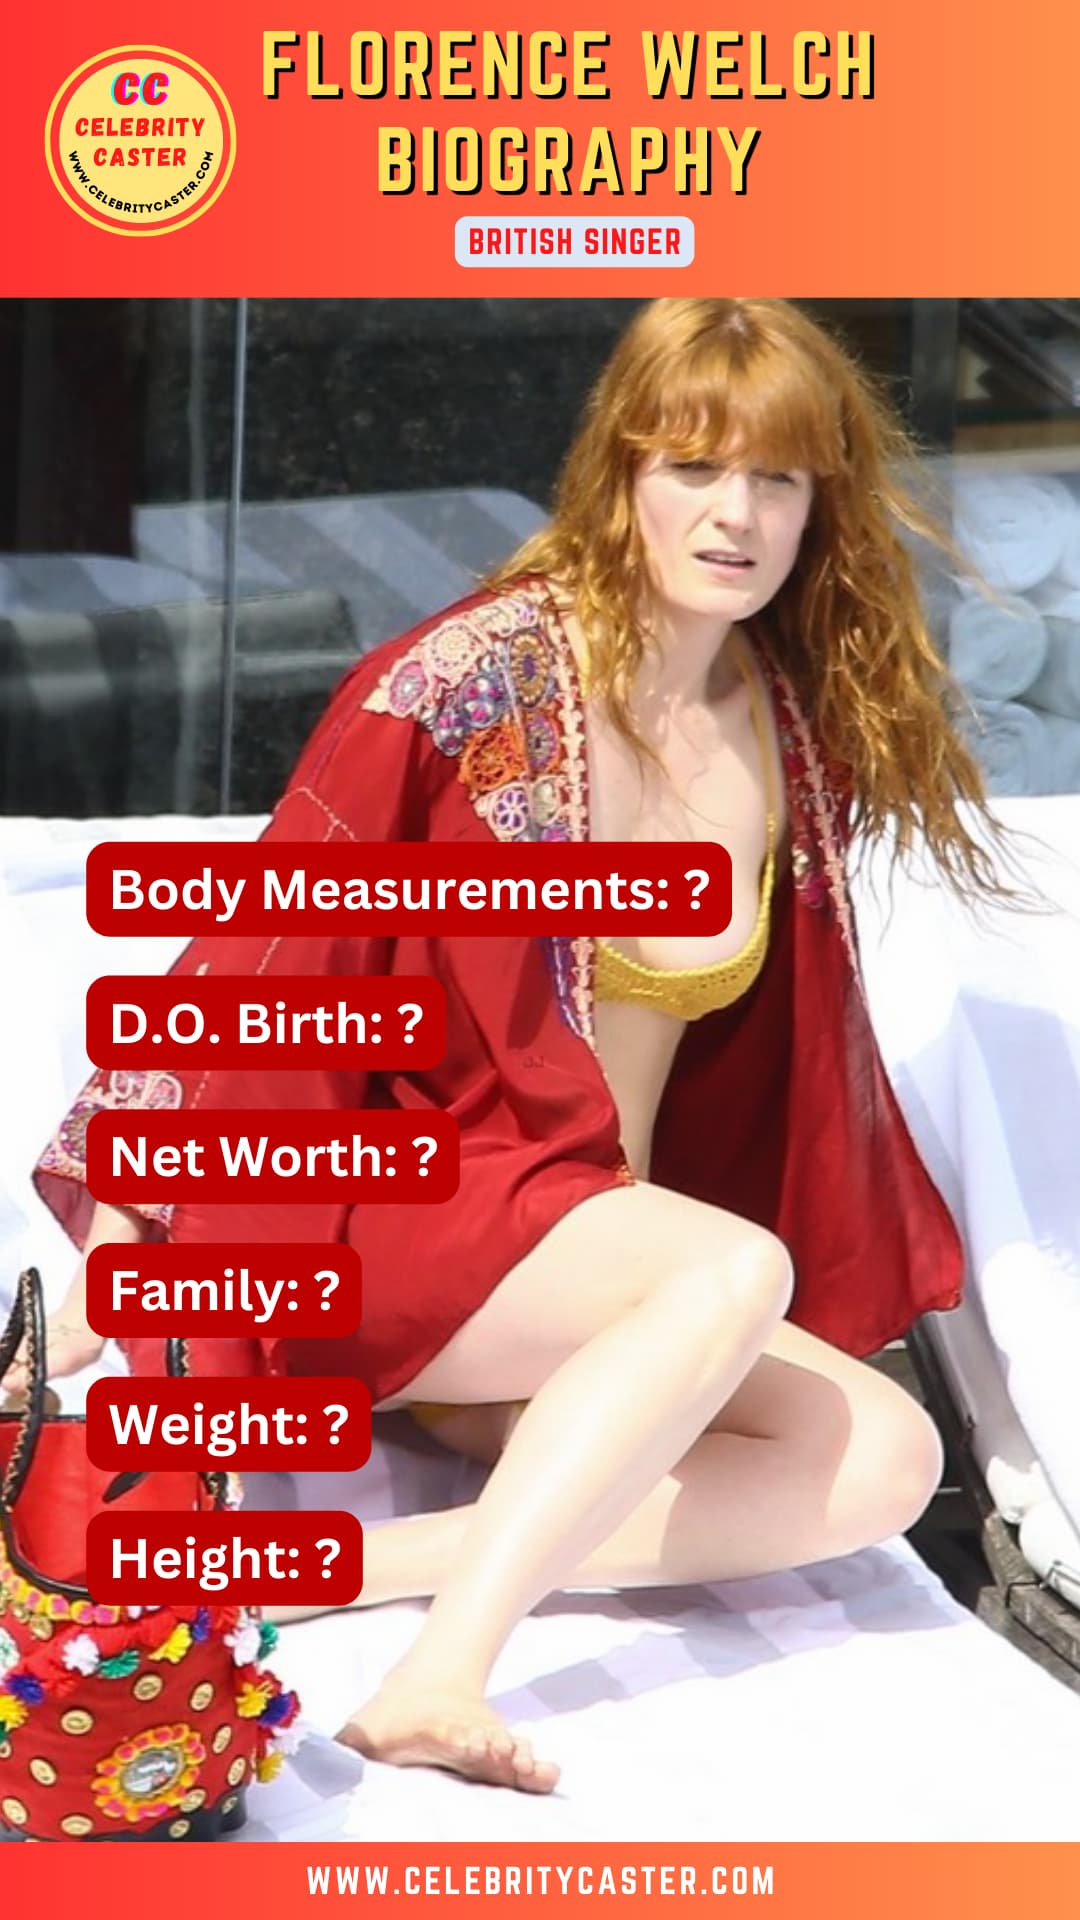 Florence Welch Biography